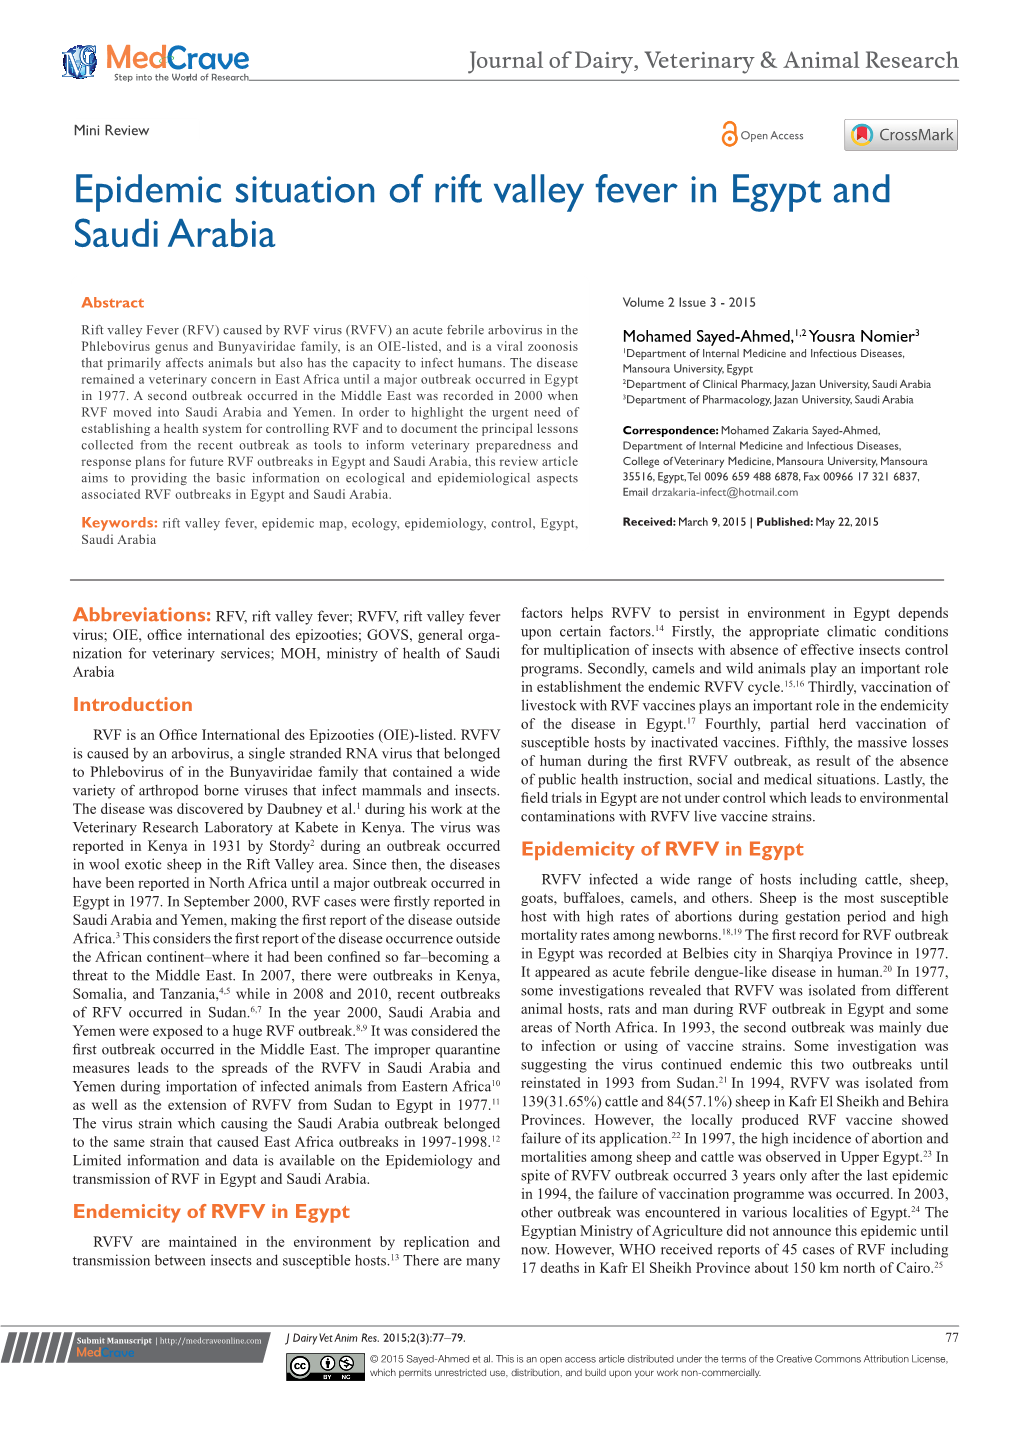 Epidemic Situation of Rift Valley Fever in Egypt and Saudi Arabia